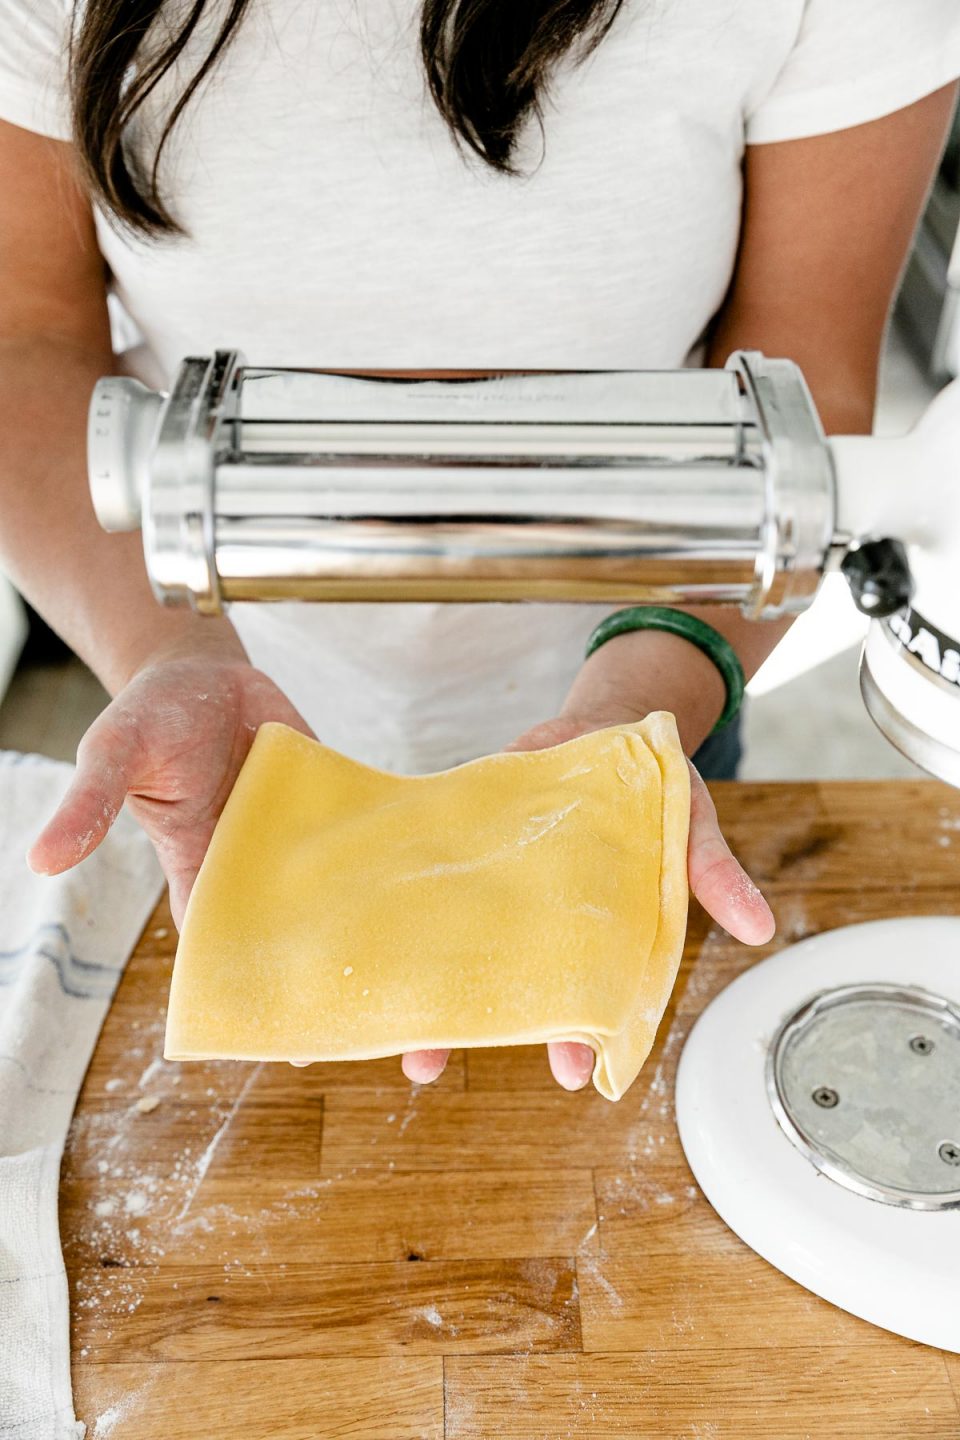 Jess of Plays Well With Butter holds a whole sheet of rolled pasta dough with both hands over a butcher block countertop. ​A KitchenAid Stand Mixer with a pasta rolling attachment is set up to be used to roll out the pasta dough and an aluminum baking sheet also sits on top of the countertop.